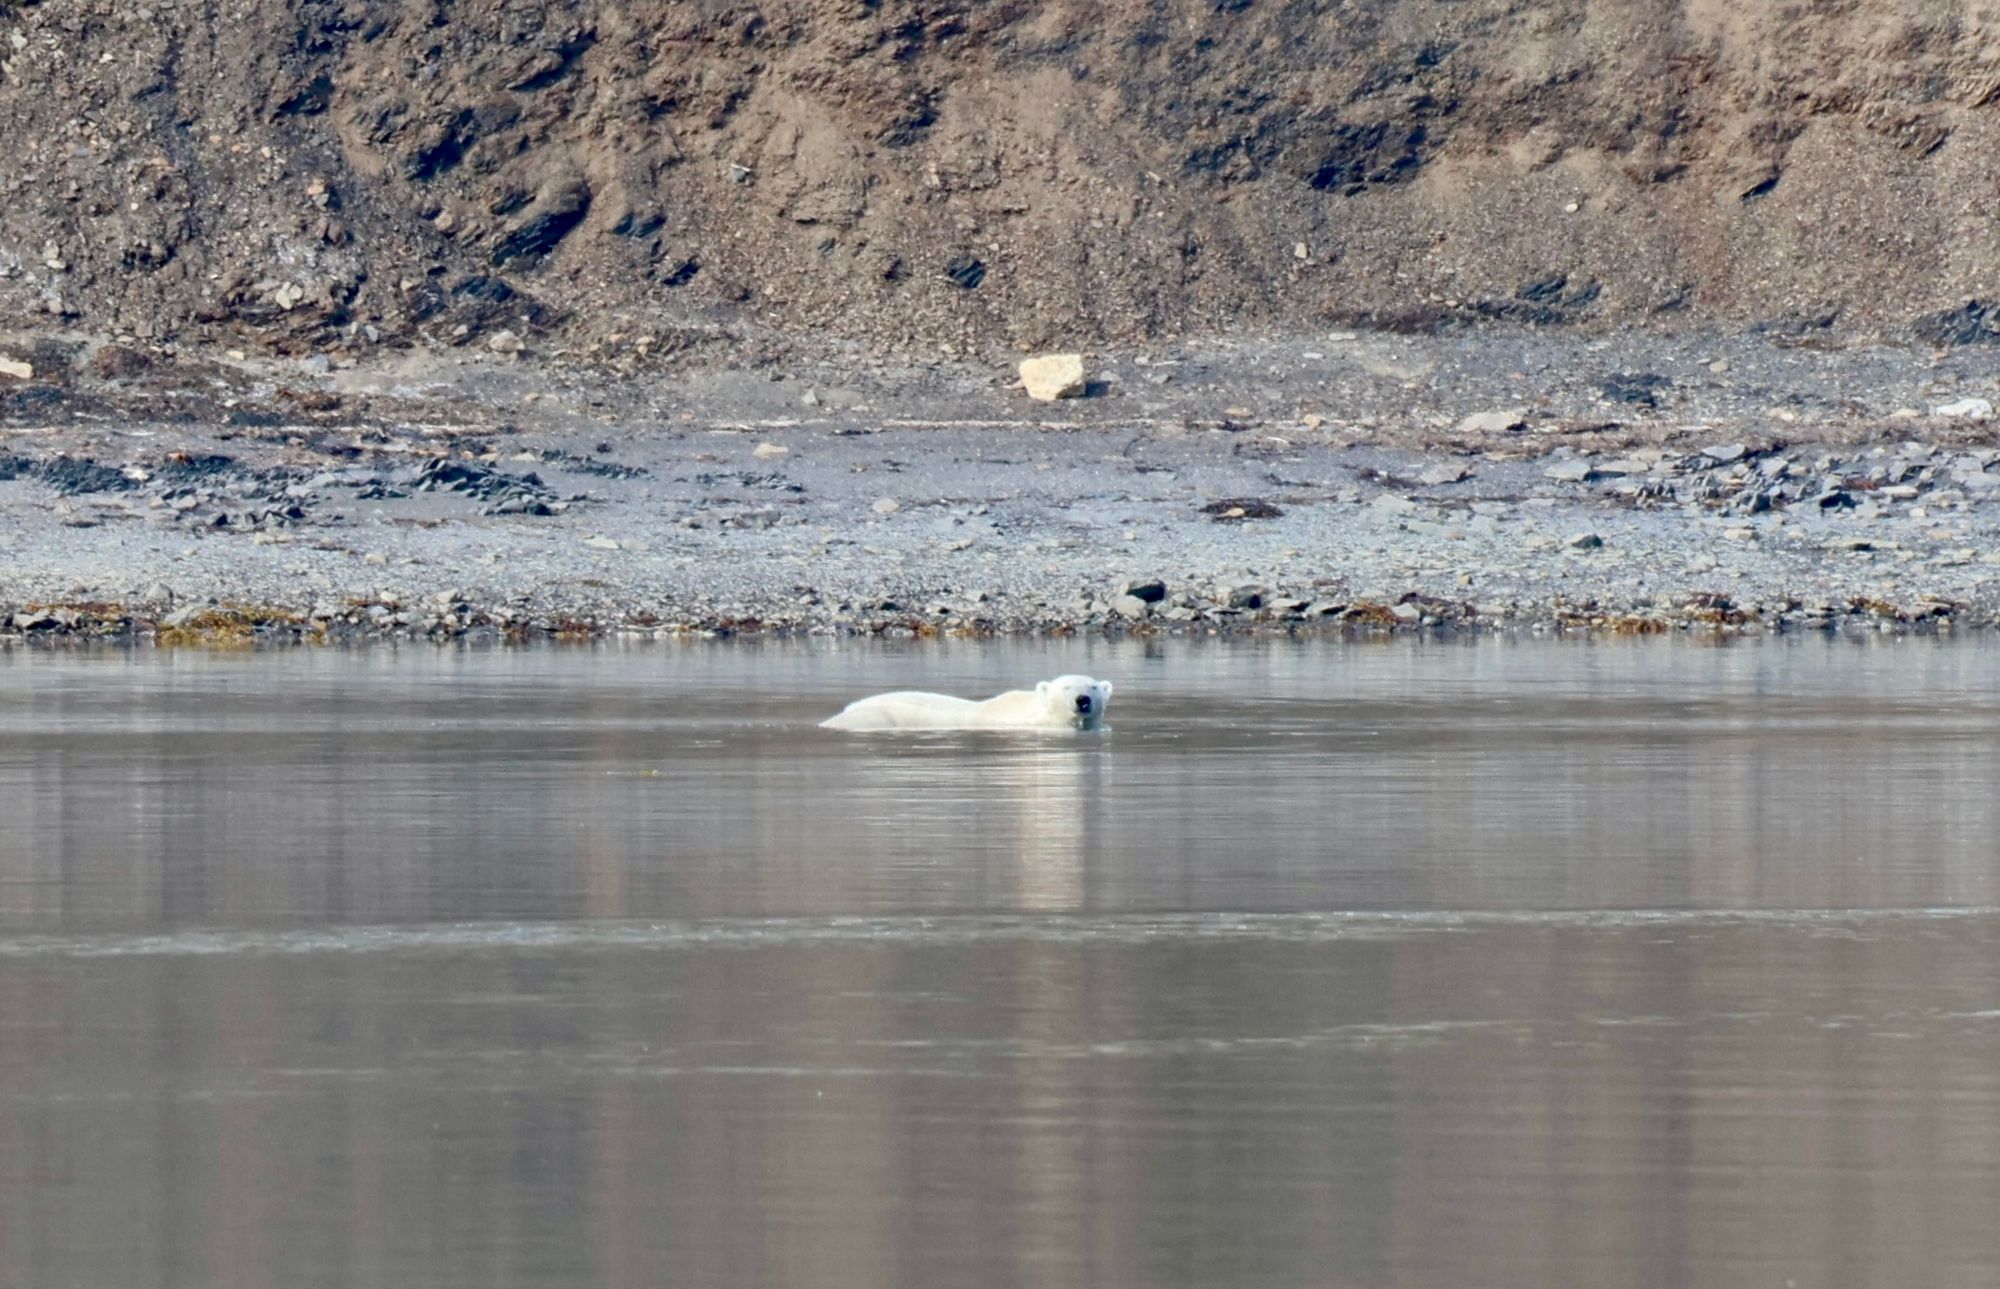 A polar bear submerged in the water just off shore, Spitsbergen Island.